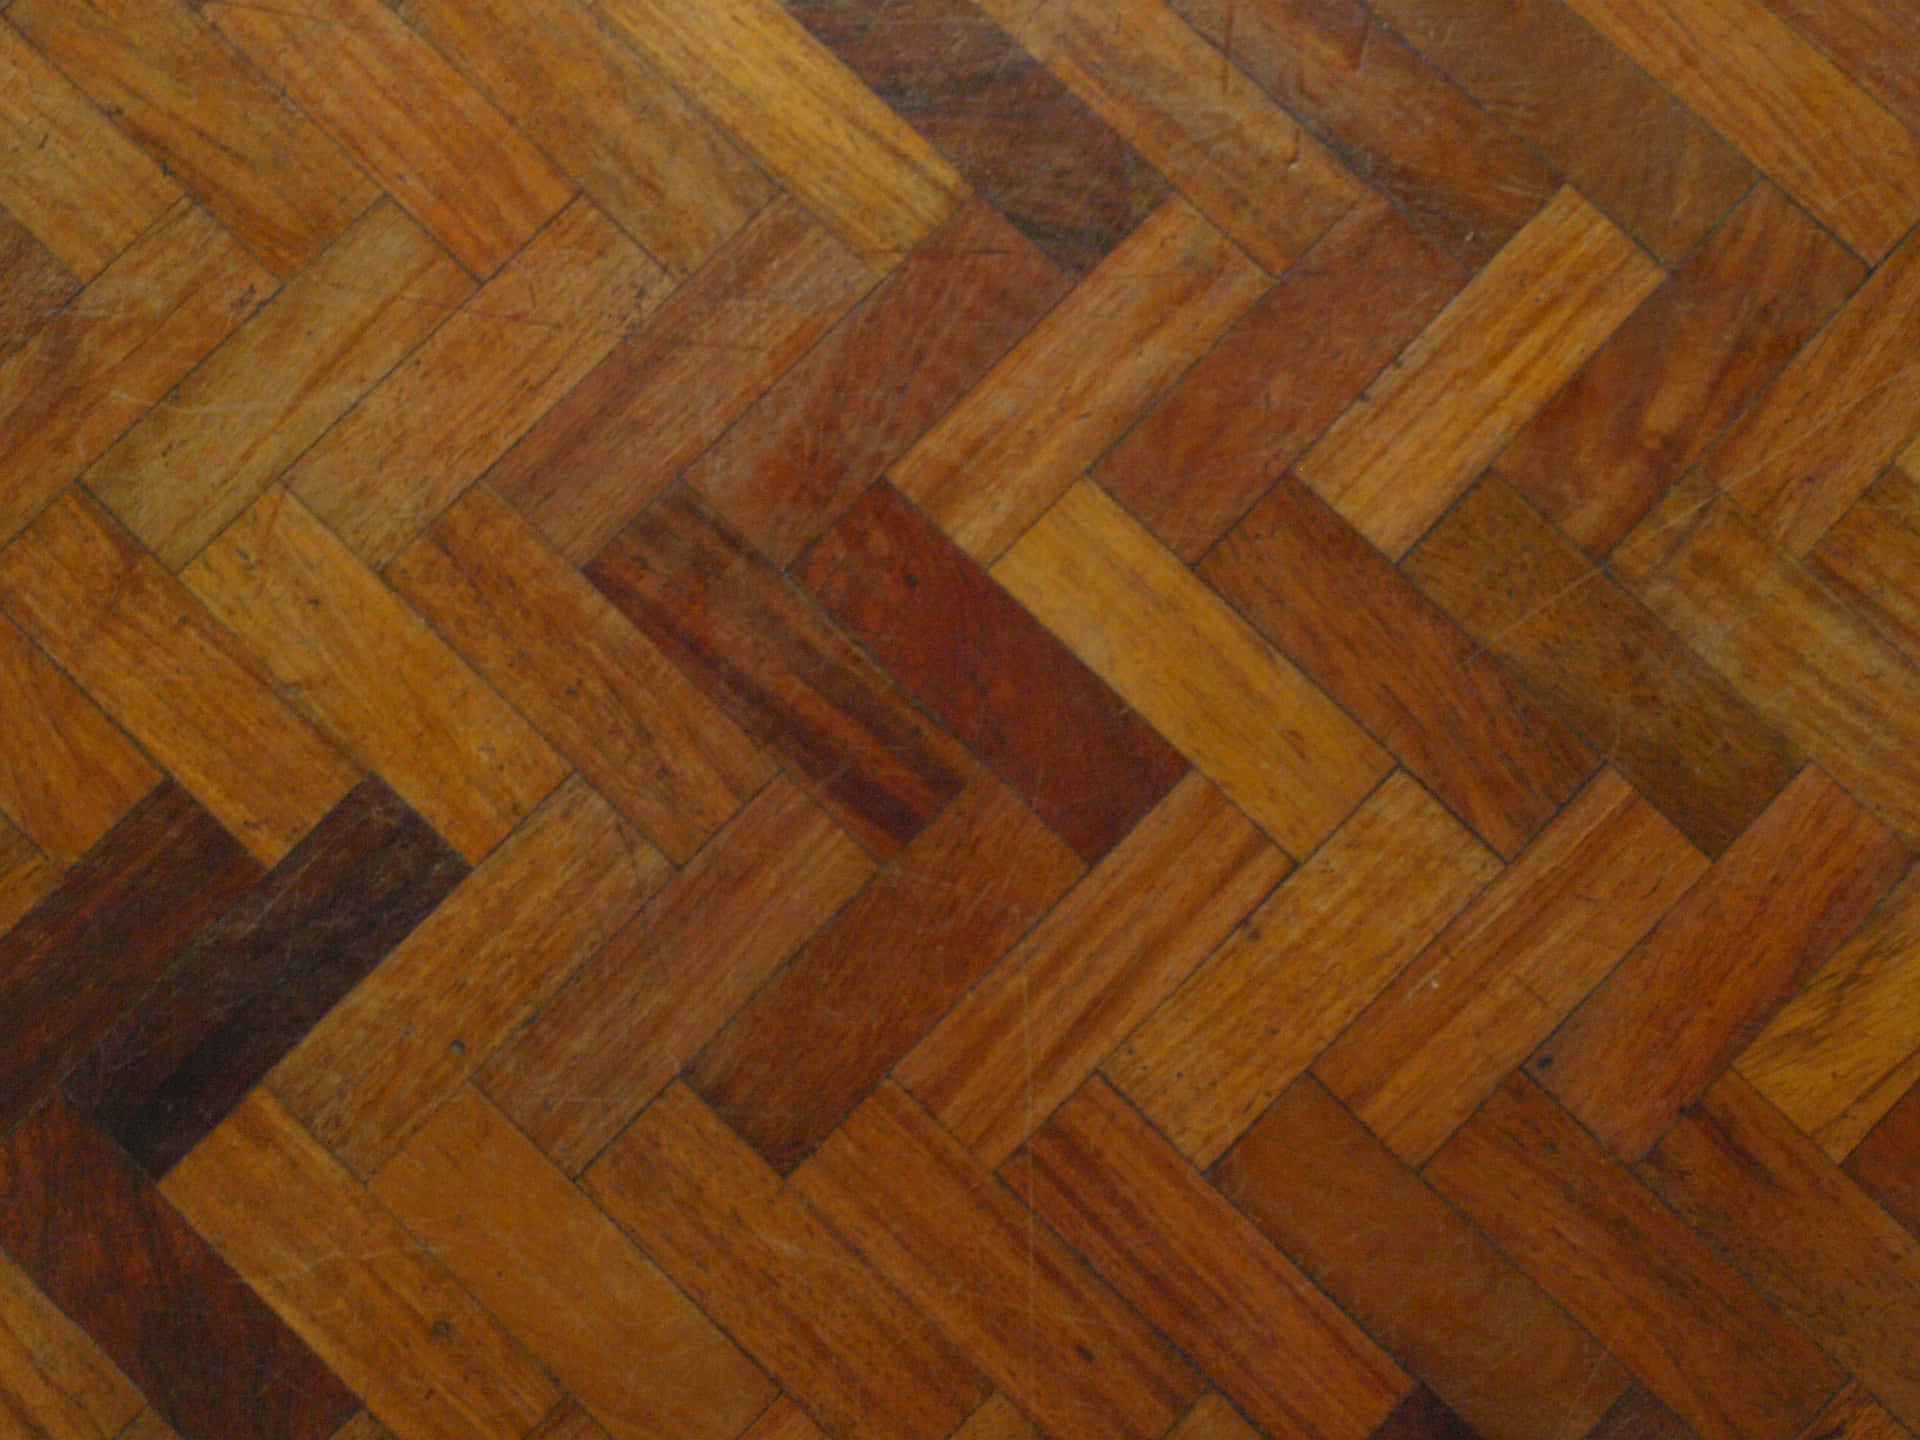 A Close Up Of A Wooden Floor With A Pattern